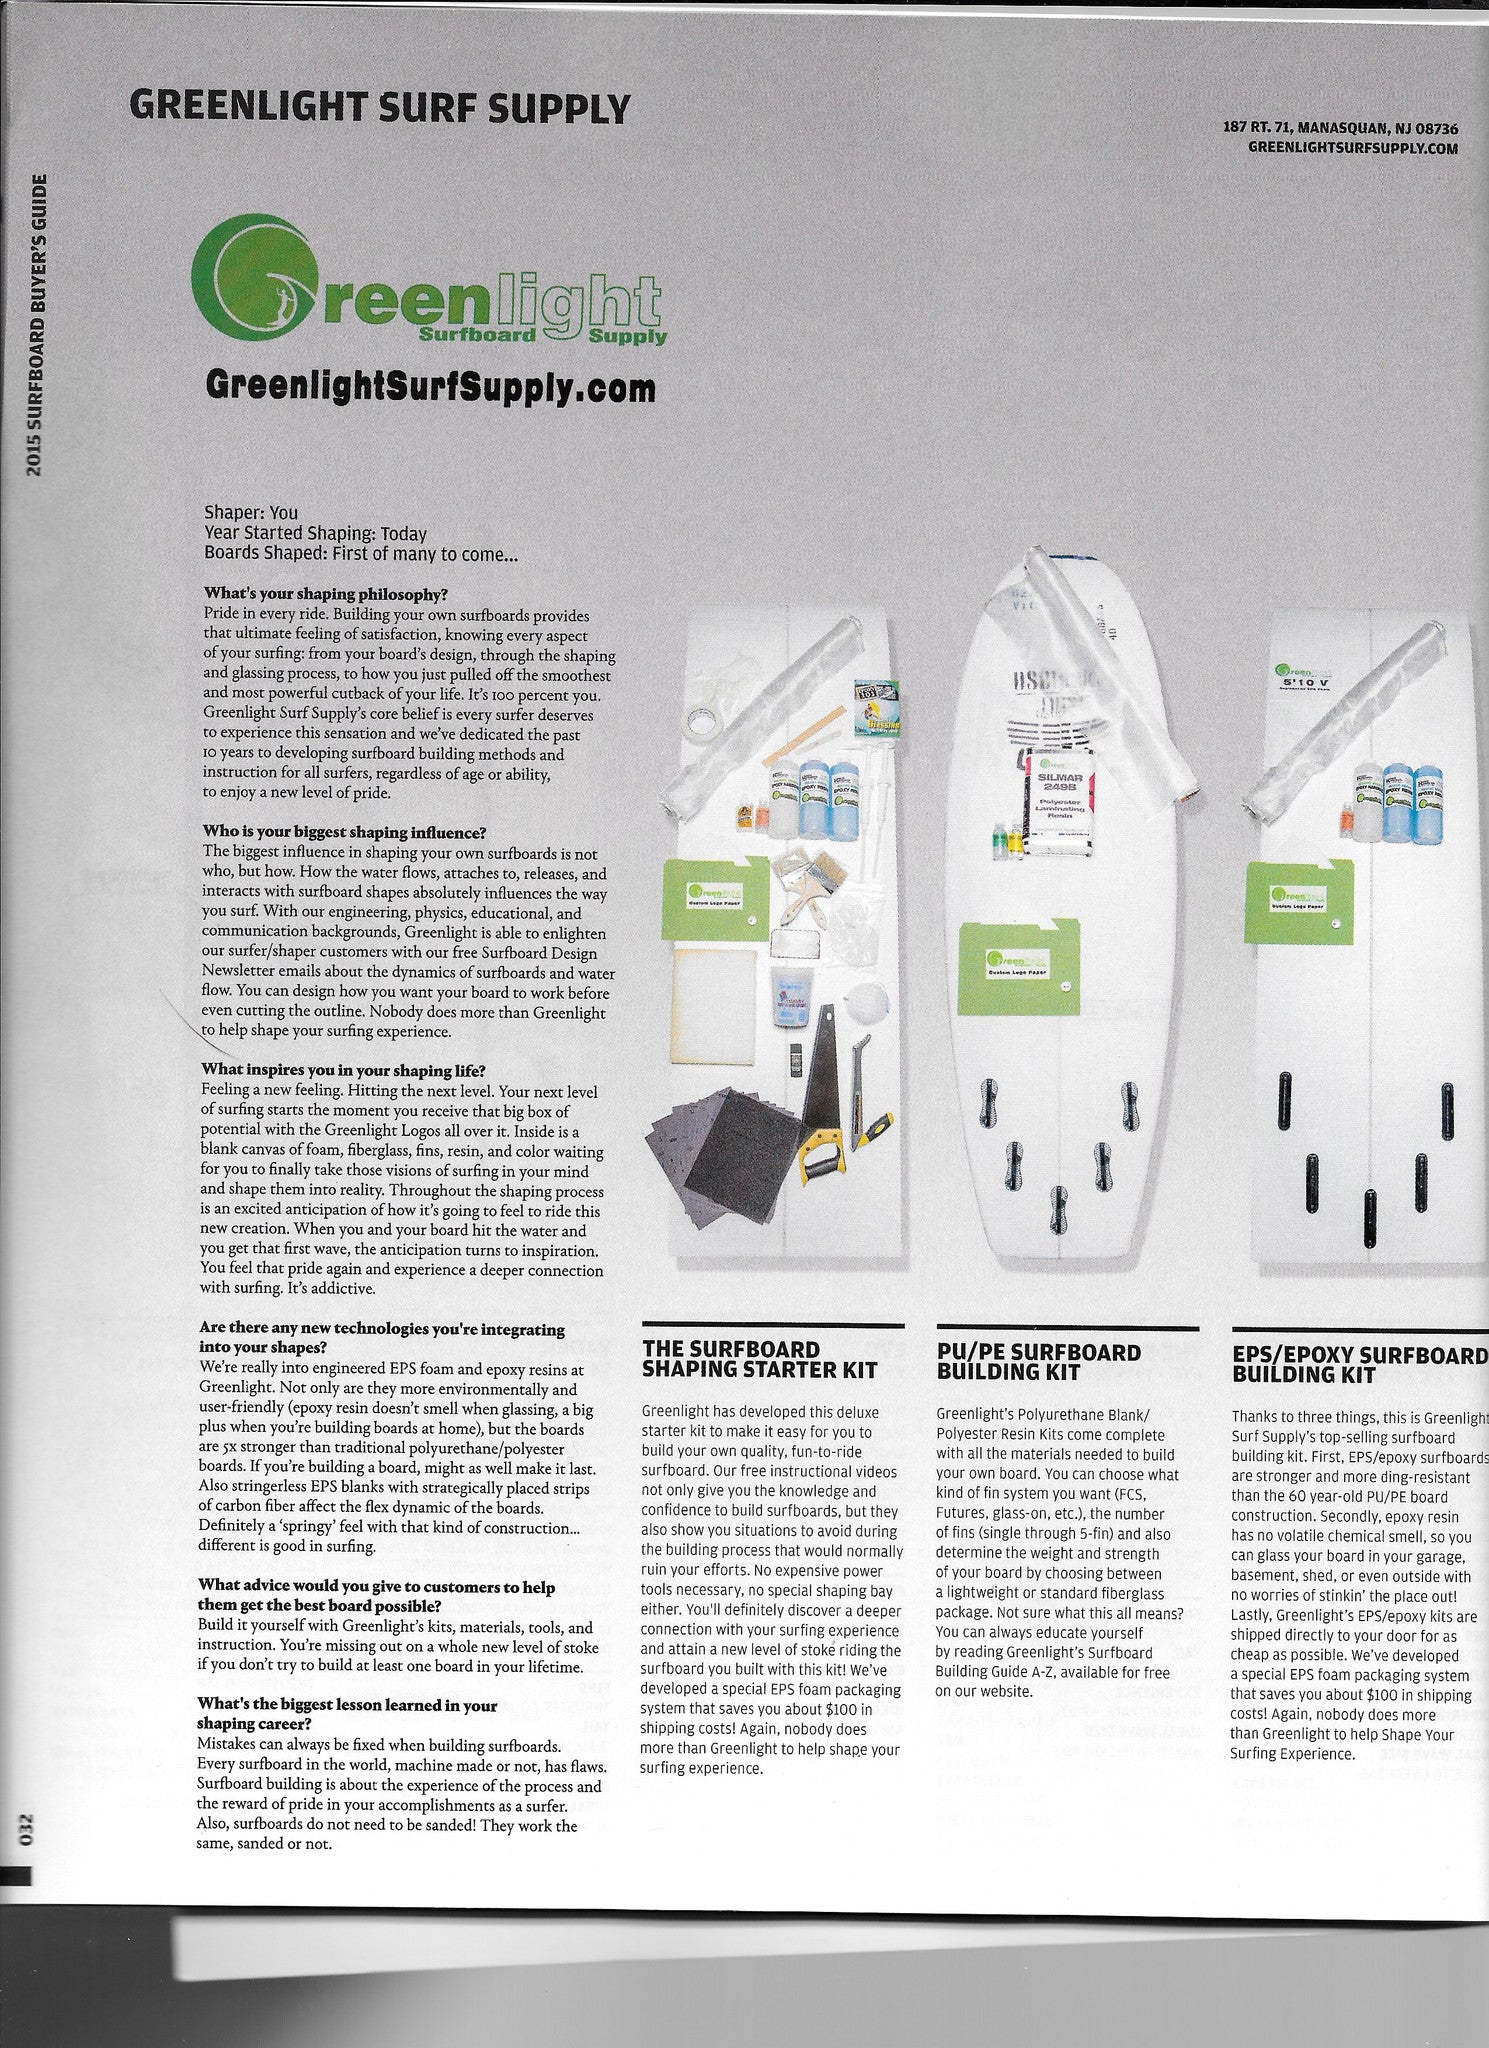 Greenlight Surfboard Shaping Kits Featured in SurferMag Board Buyers Guide